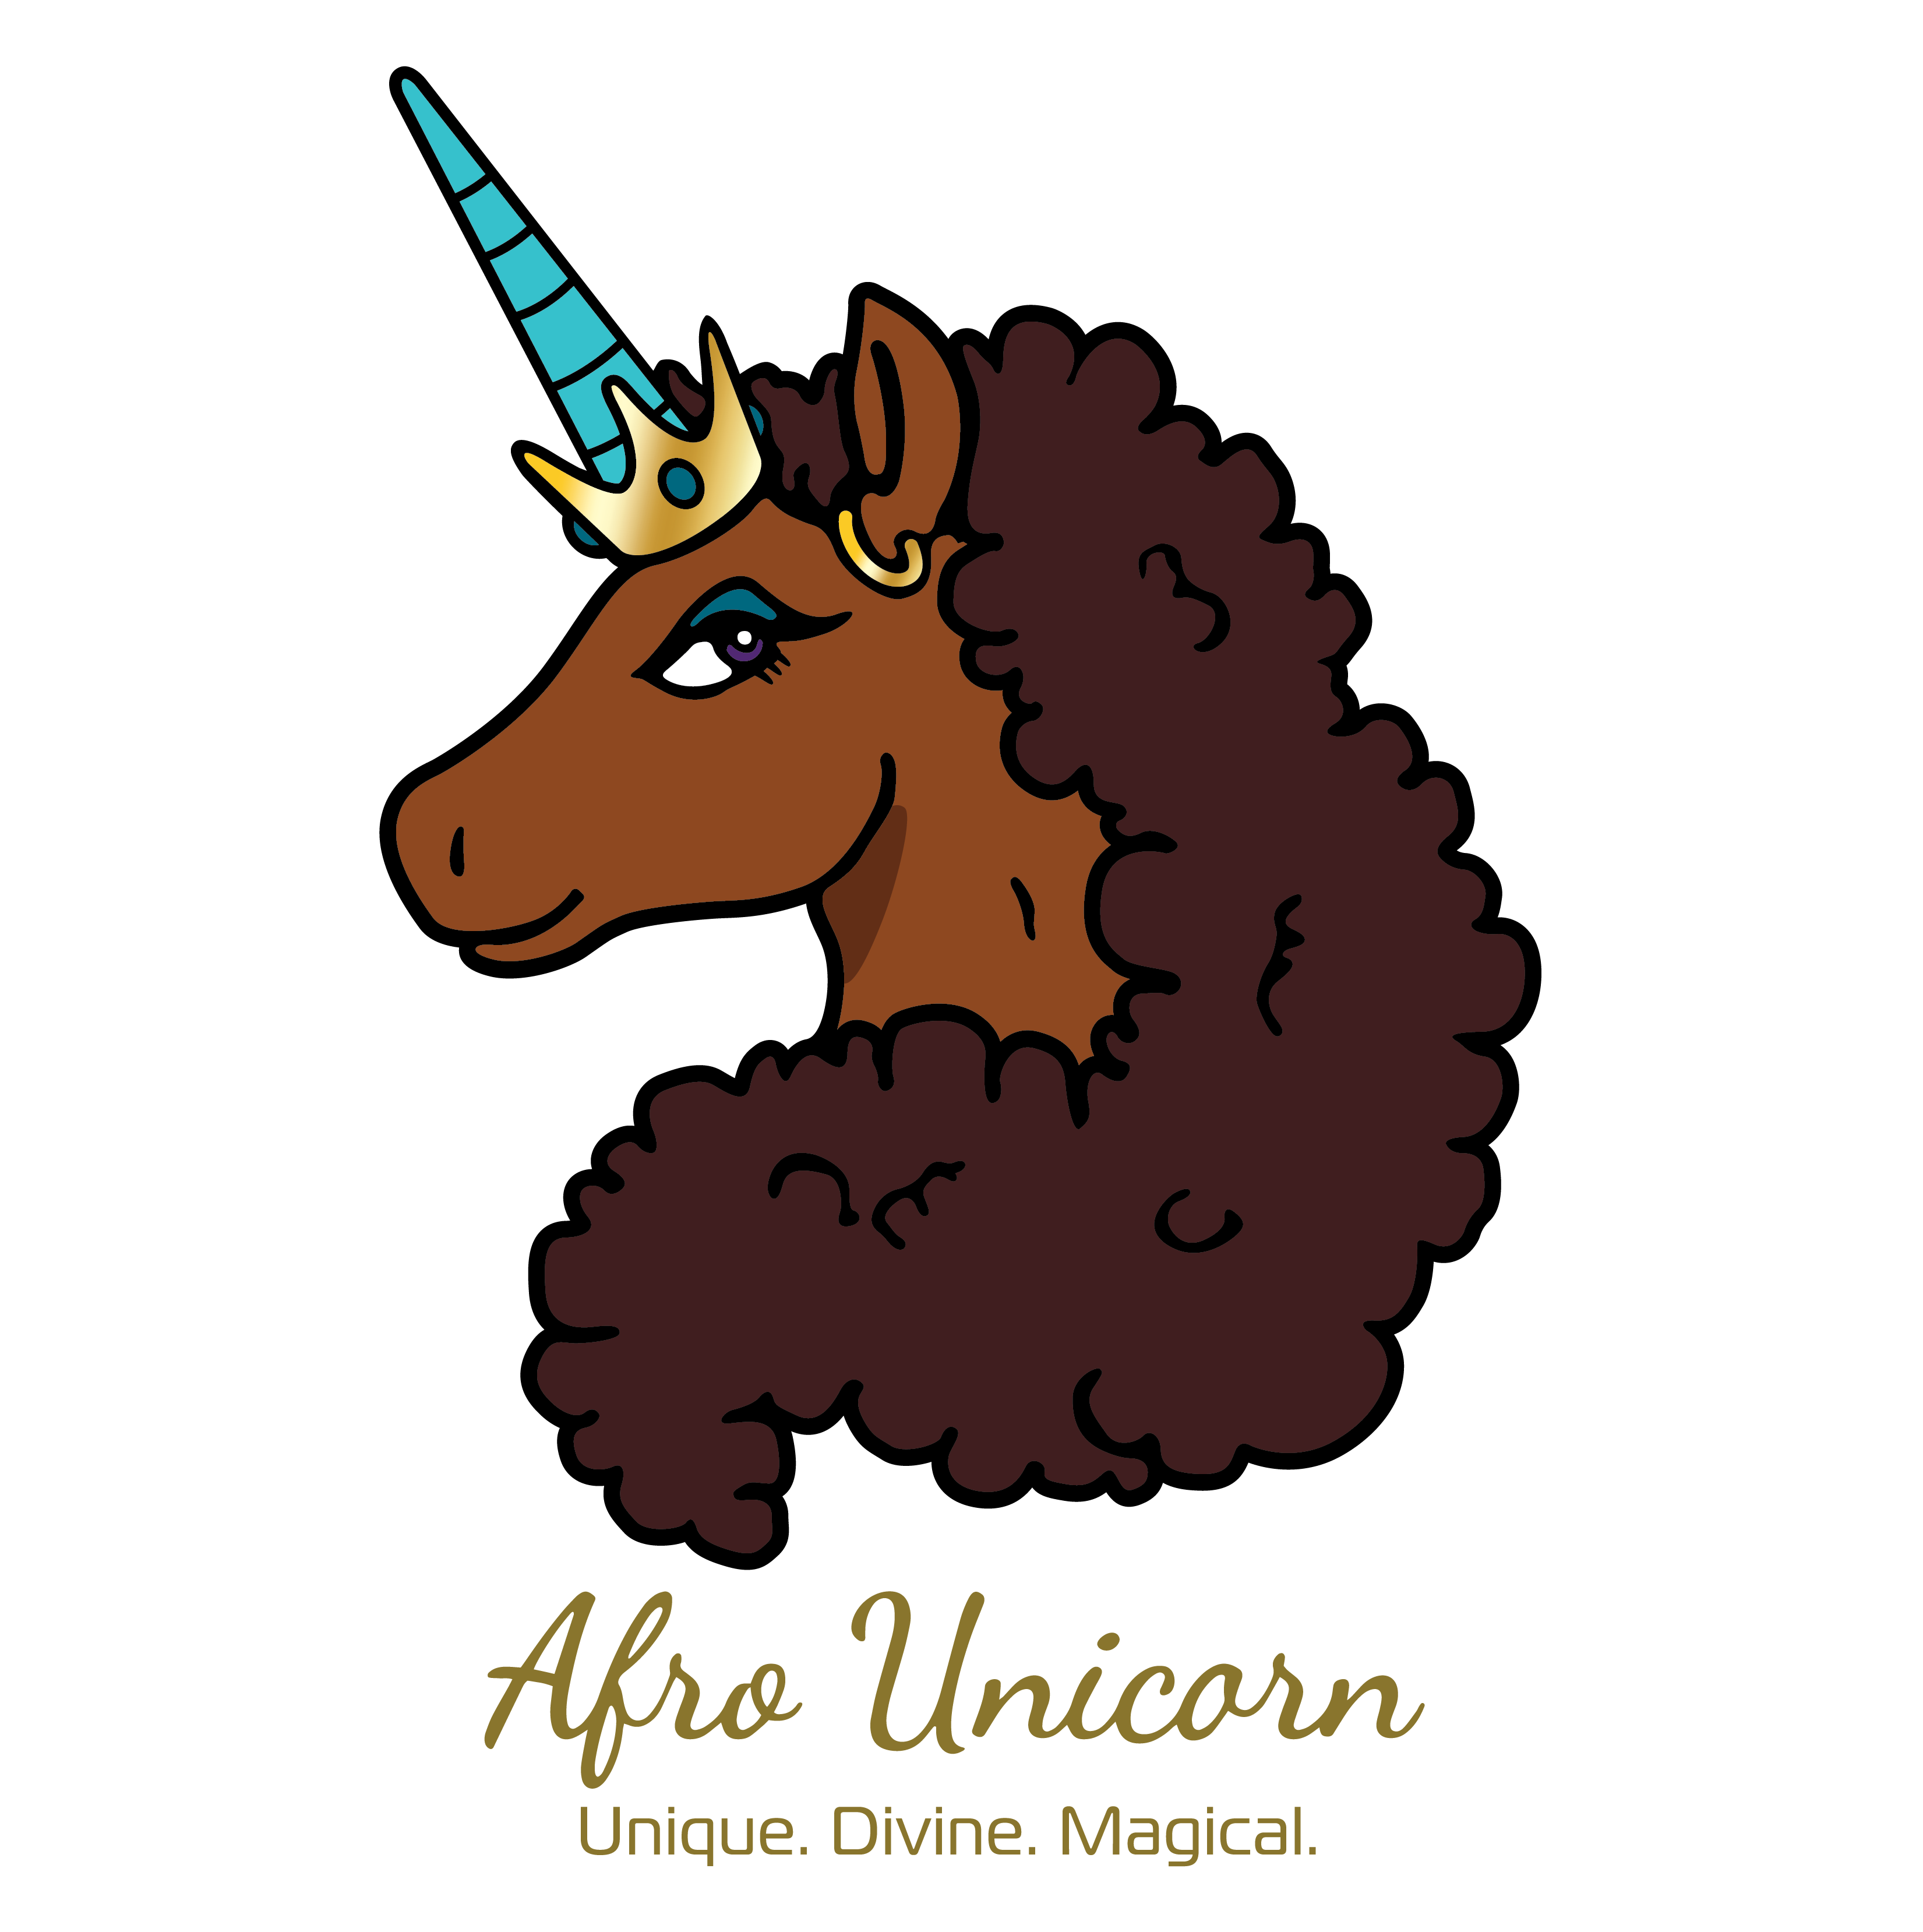 AFRO UNICORN® LAUNCHES DIVERSE PRODUCTS AT CVS